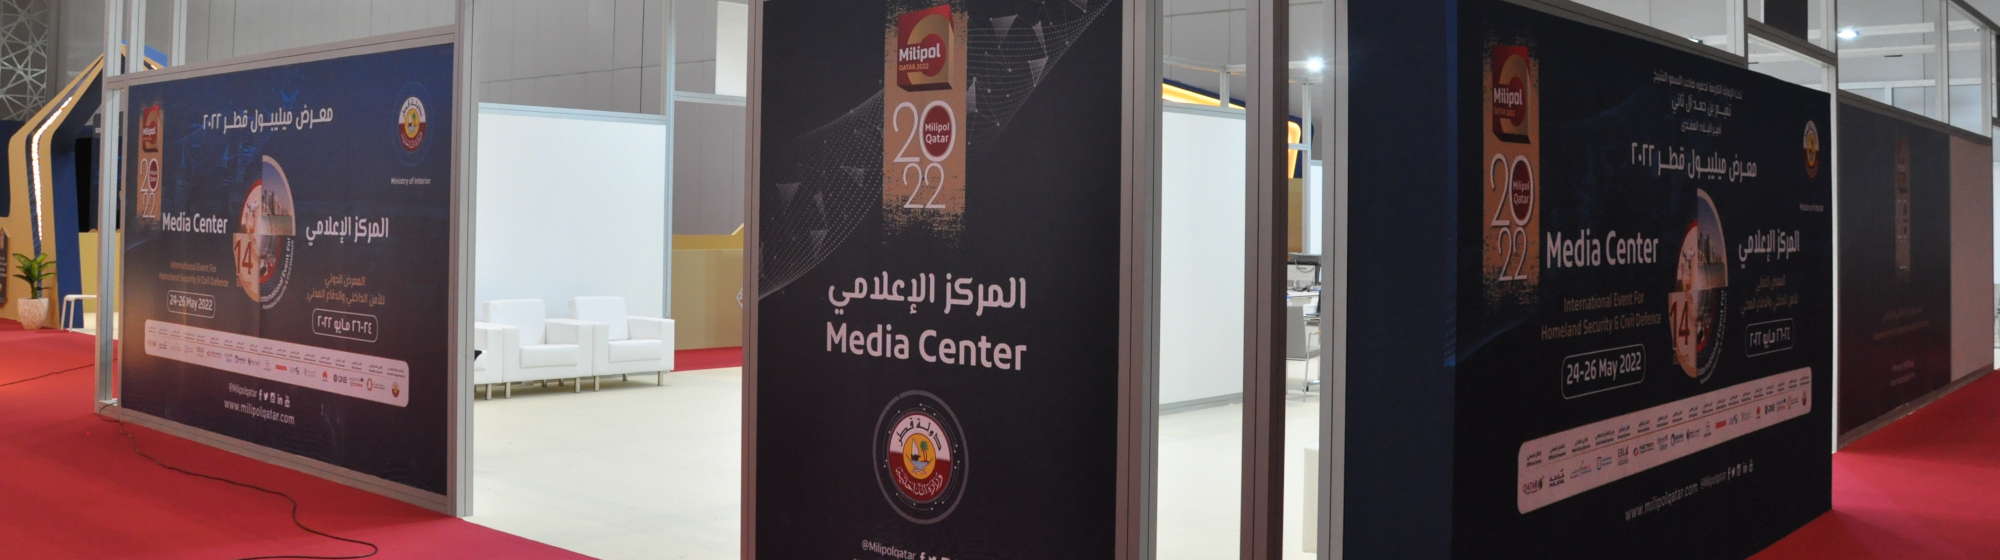 View of the media center at the heart of Milipol Qatar